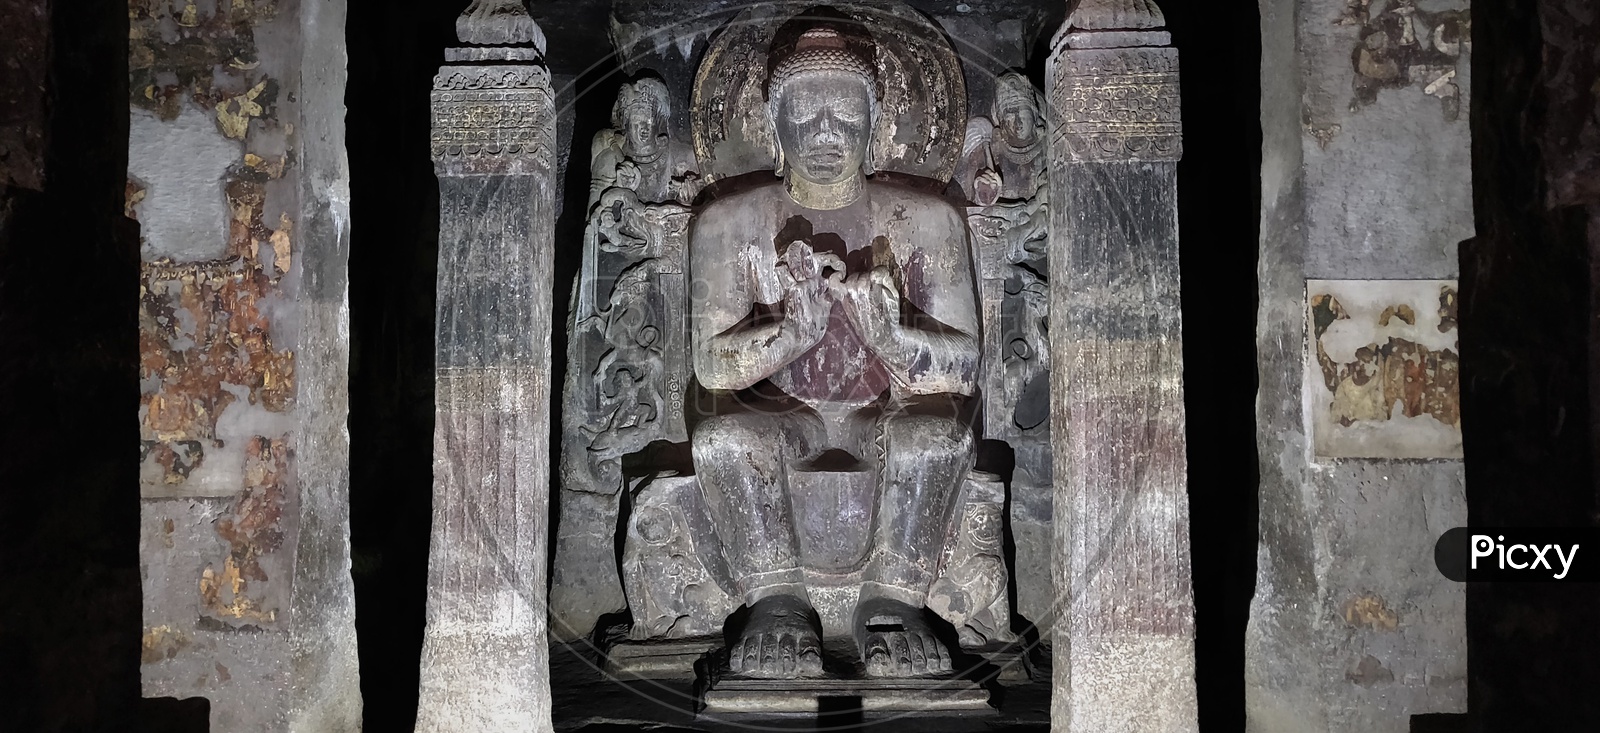 Ancient Stone Cravings Of Buddhist Temples  at Ajanta Caves    Or  Tourist Attraction Of  Ancient Caves At Ajanta in Deccan Plateau